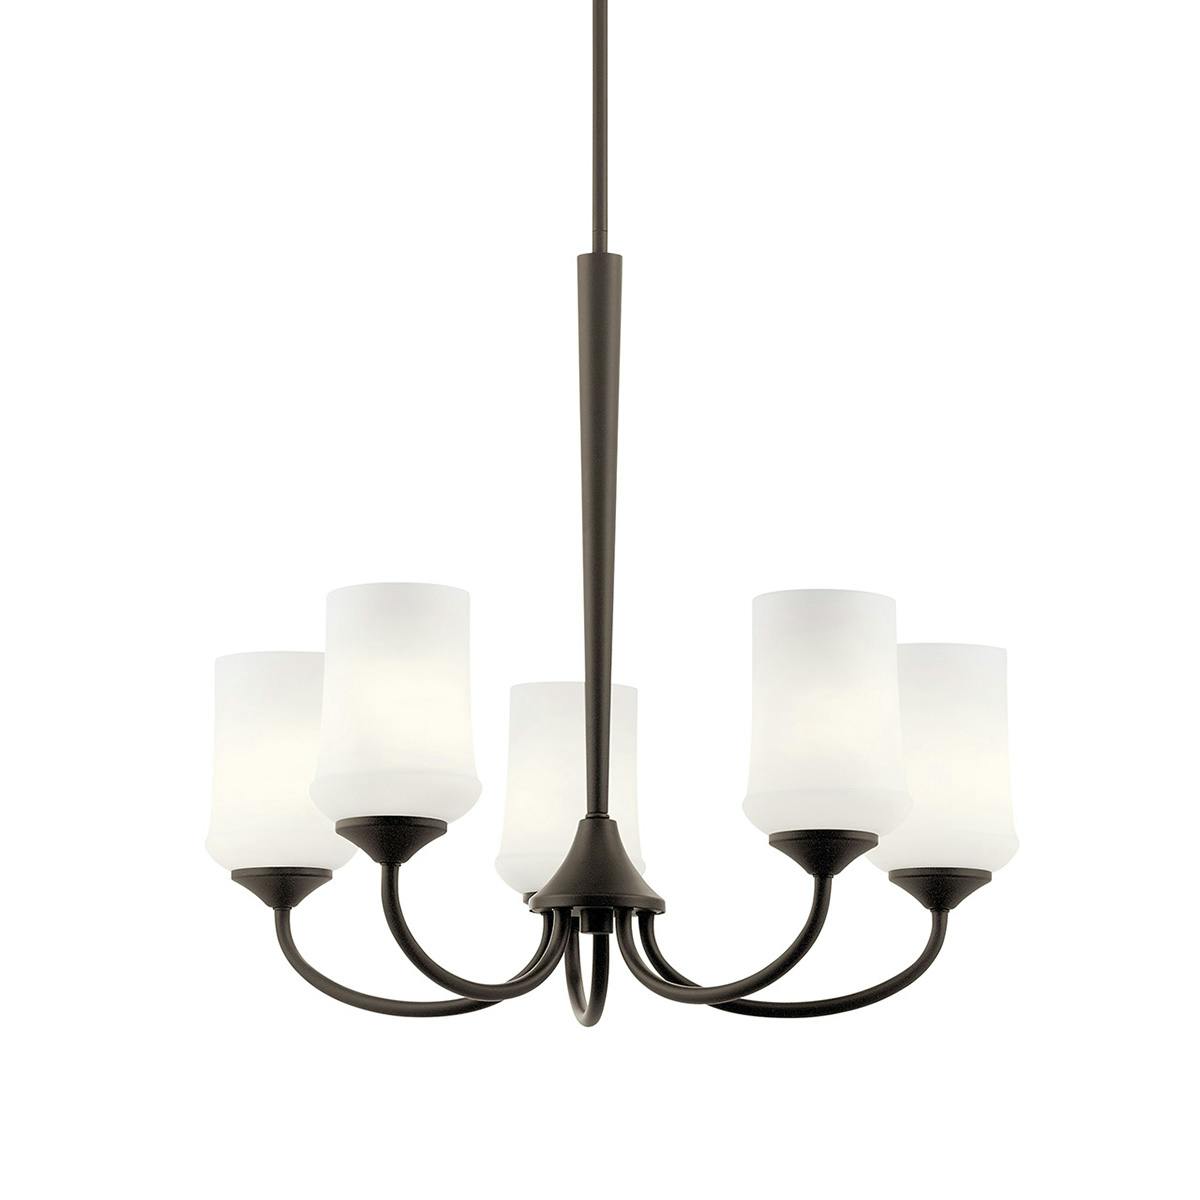 Aubrey 23" Chandelier in Olde Bronze® without the canopy on a white background